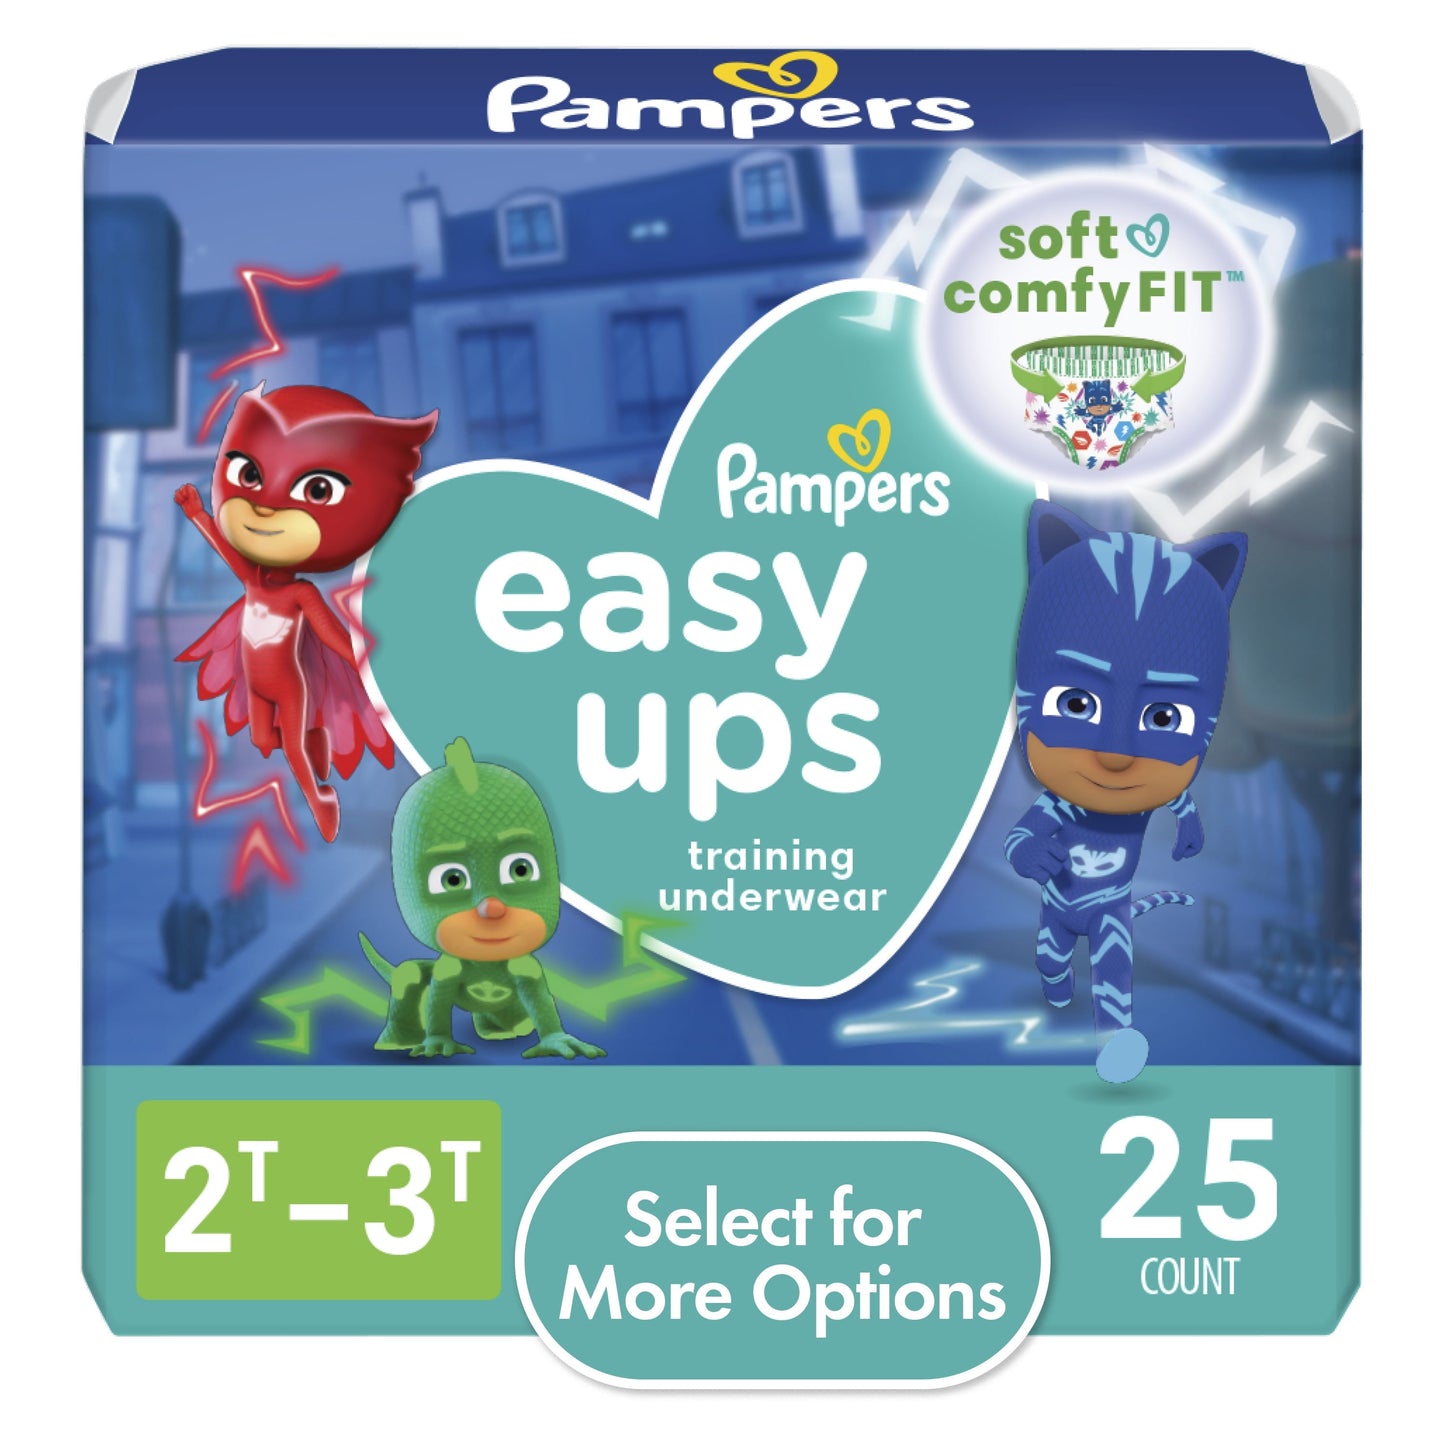 Pampers Easy Ups PJ Masks Training Pants Toddler Boys Size 2T/3T 25 Count